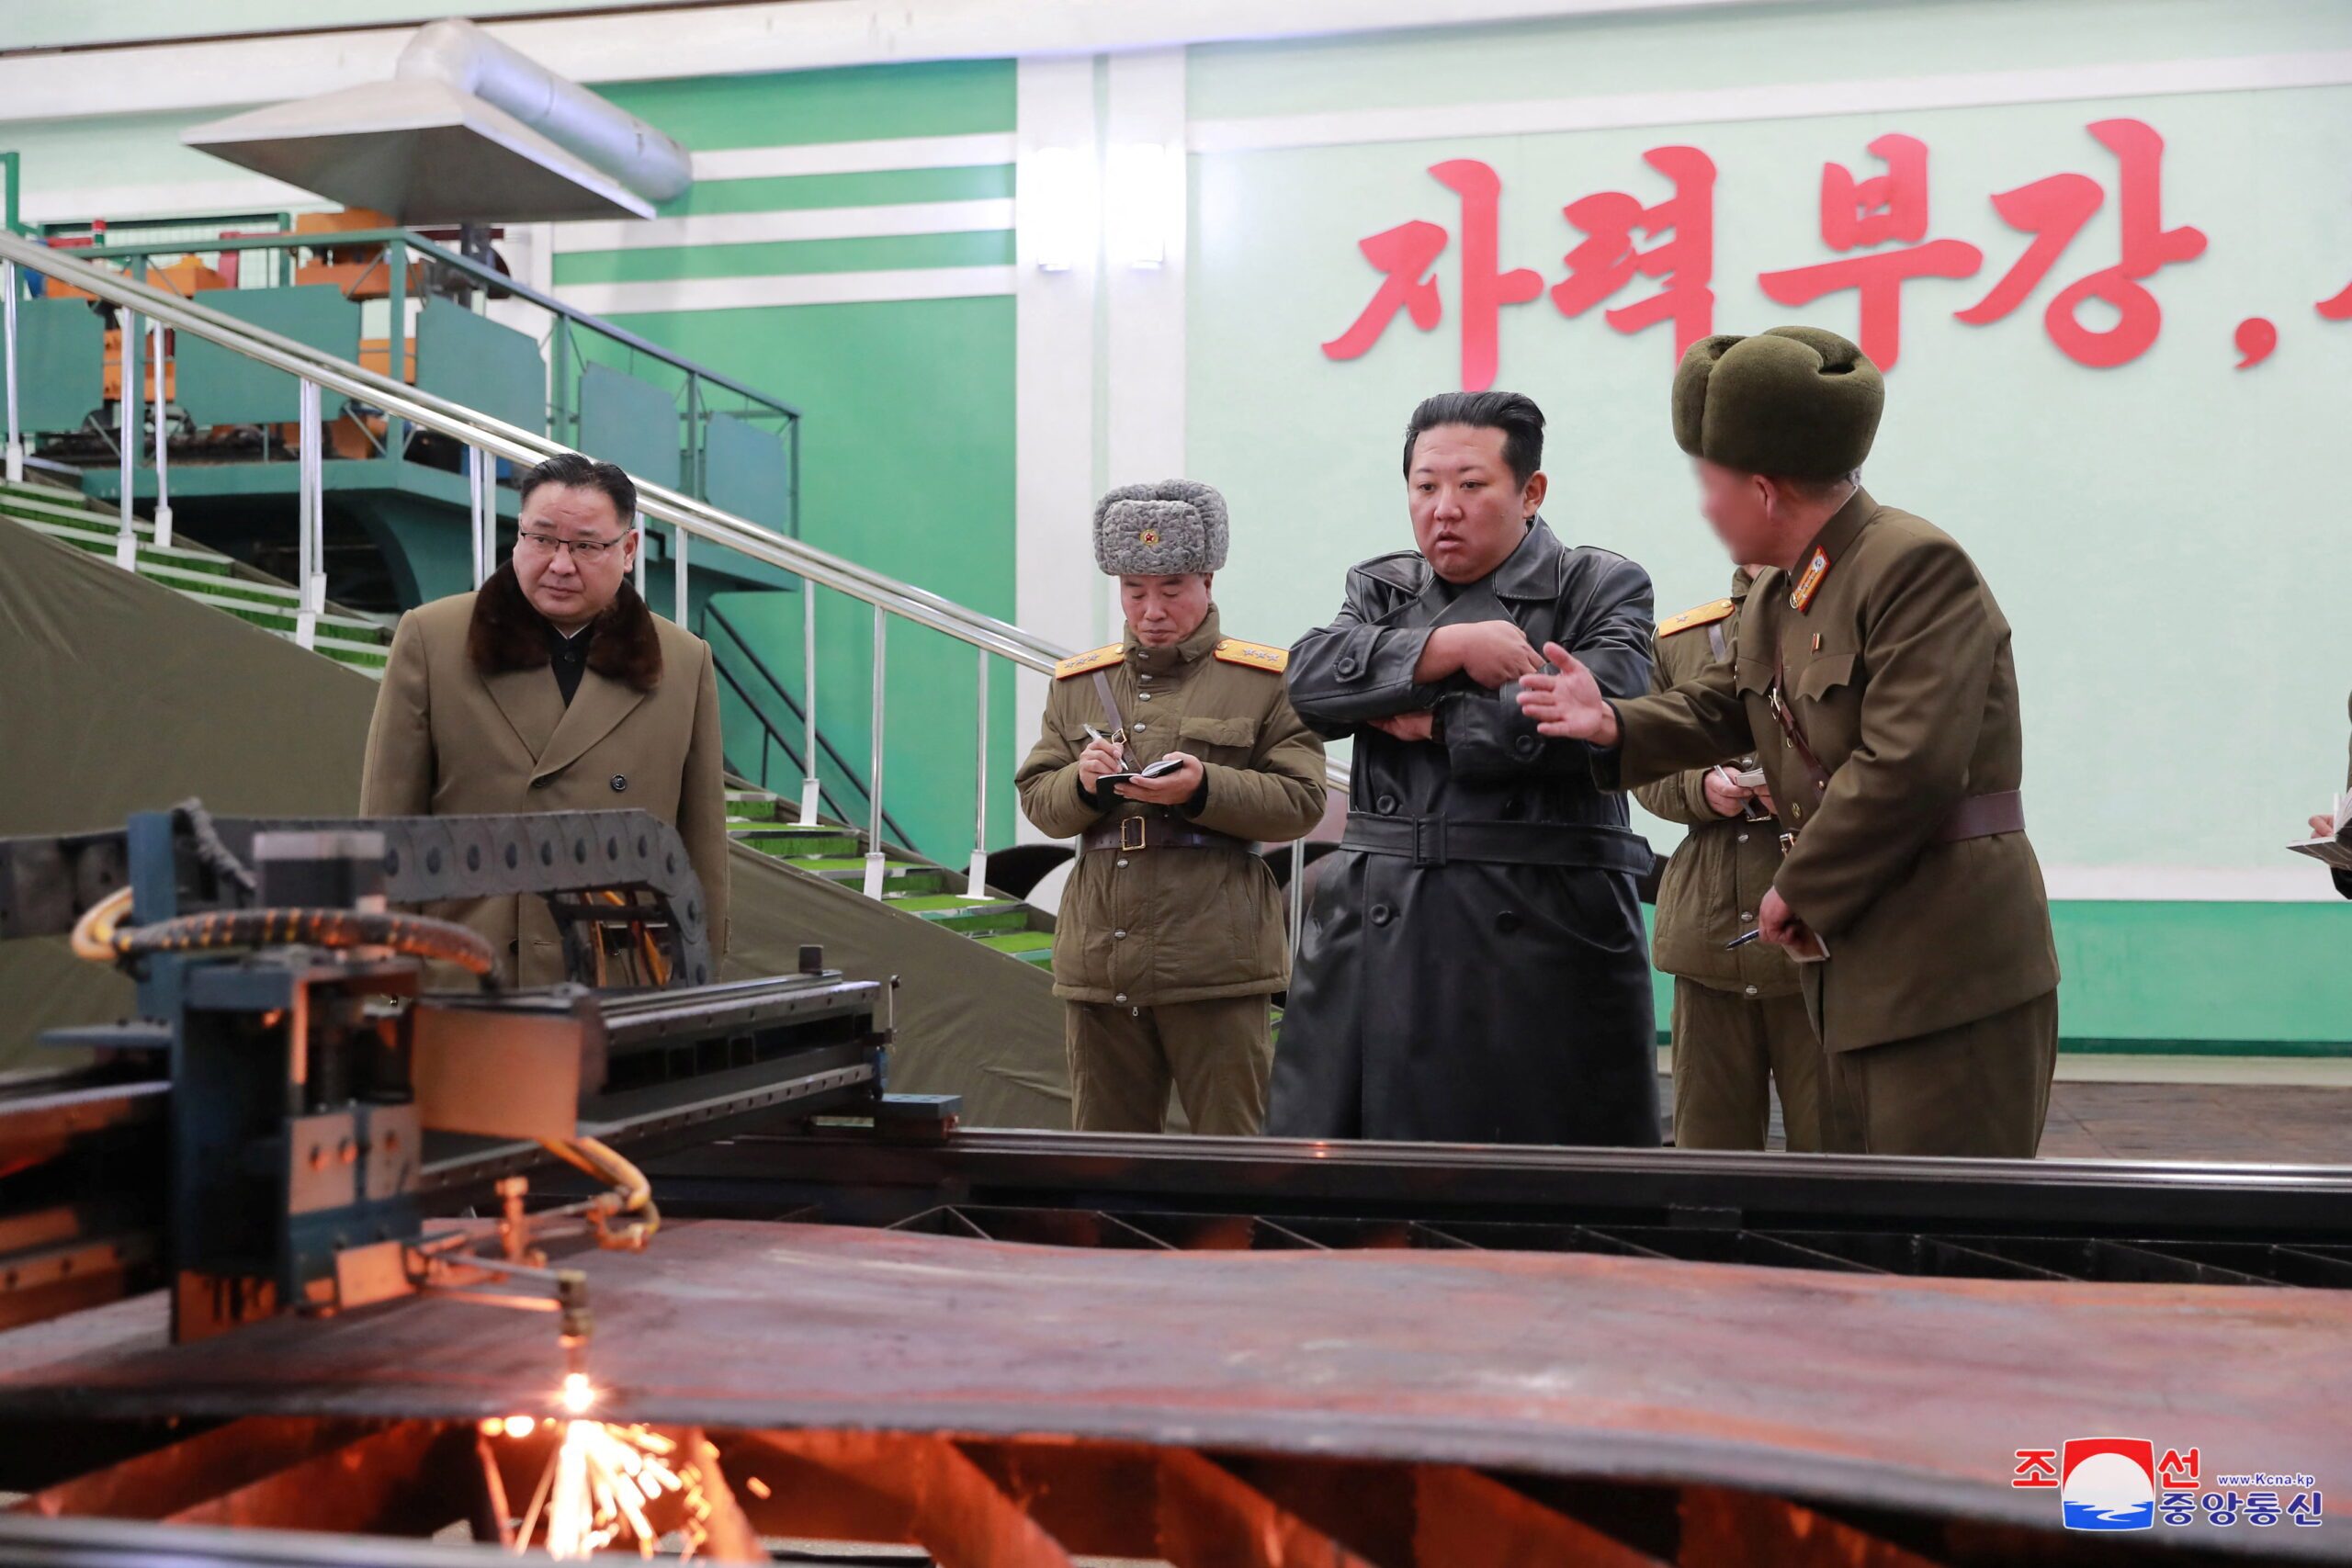 North Korea confirms latest weapons tests as Kim visits ‘important’ munitions factory